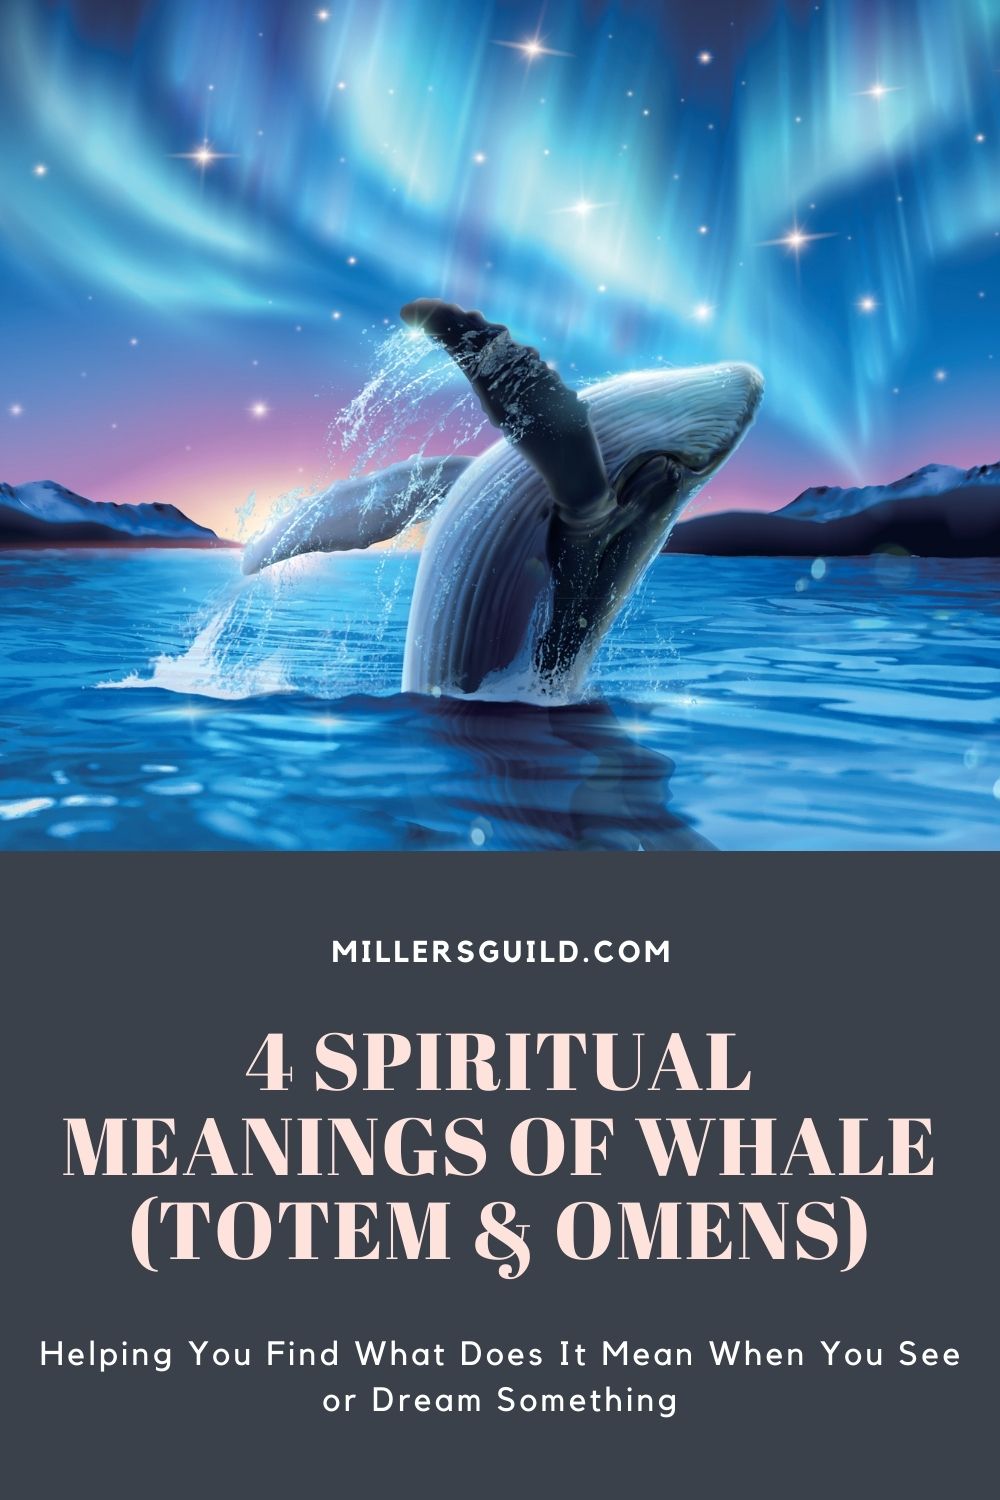 4 Spiritual Meanings of Whale (Totem & Omens) 2